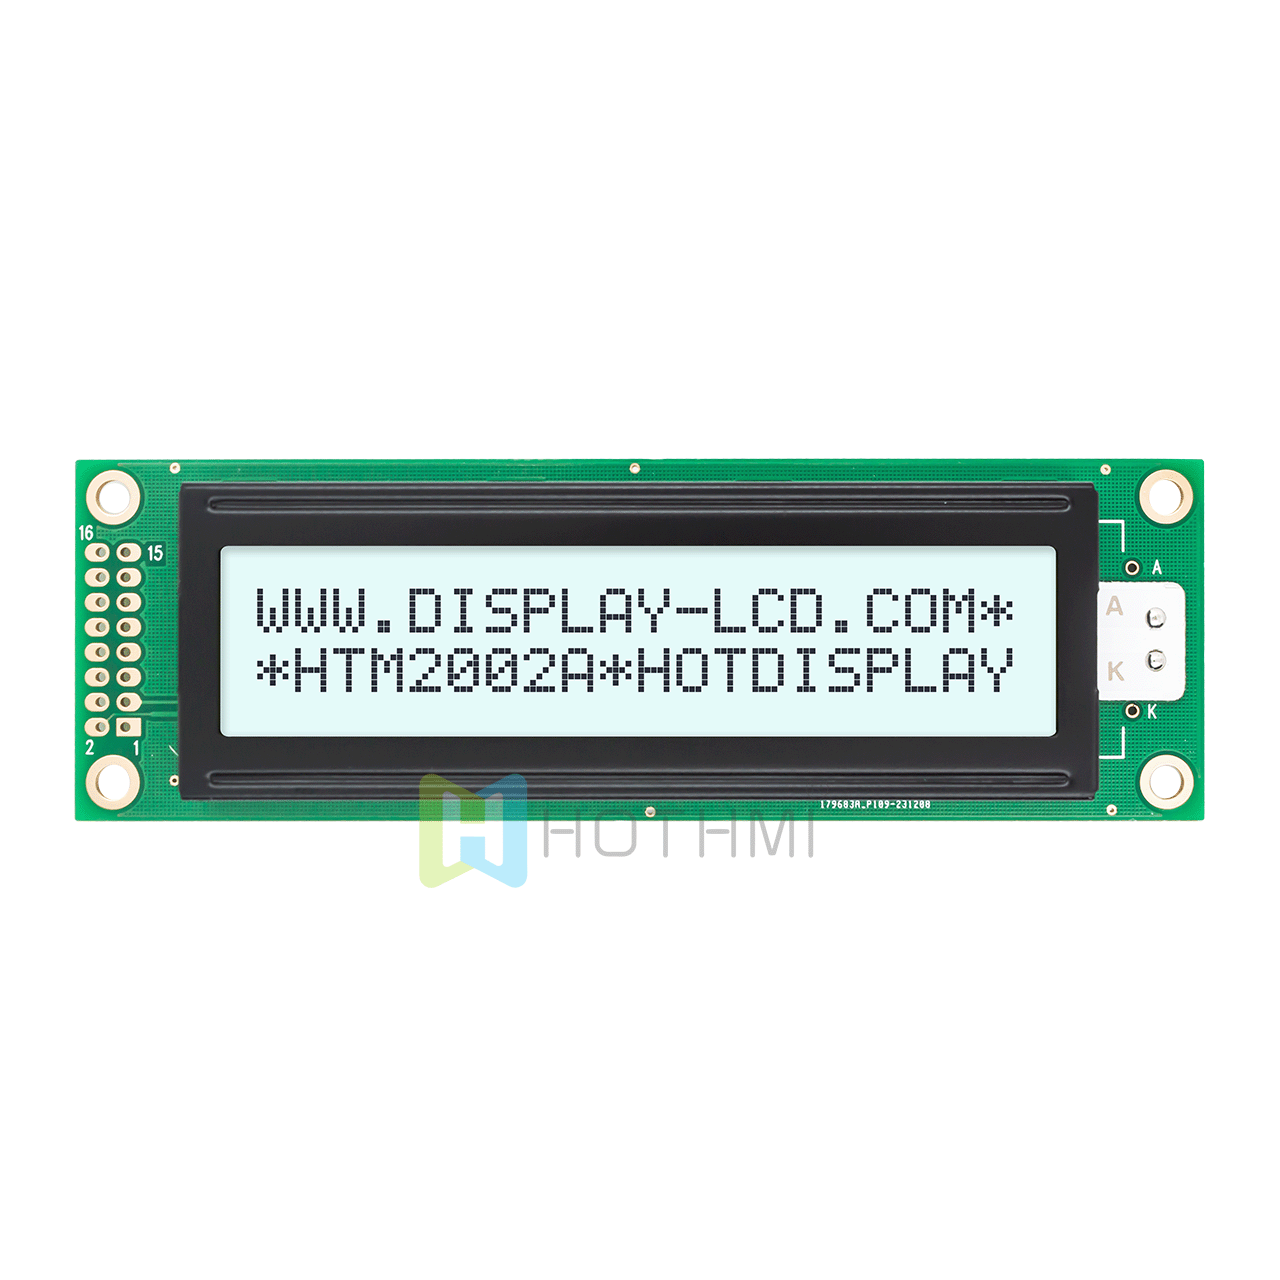 Monochrome 2X20 character LCD Module | FSTN+ white background gray character display with white backlight + English/Japanese/Russian character library | 5.0v| STU7066U | Adruino